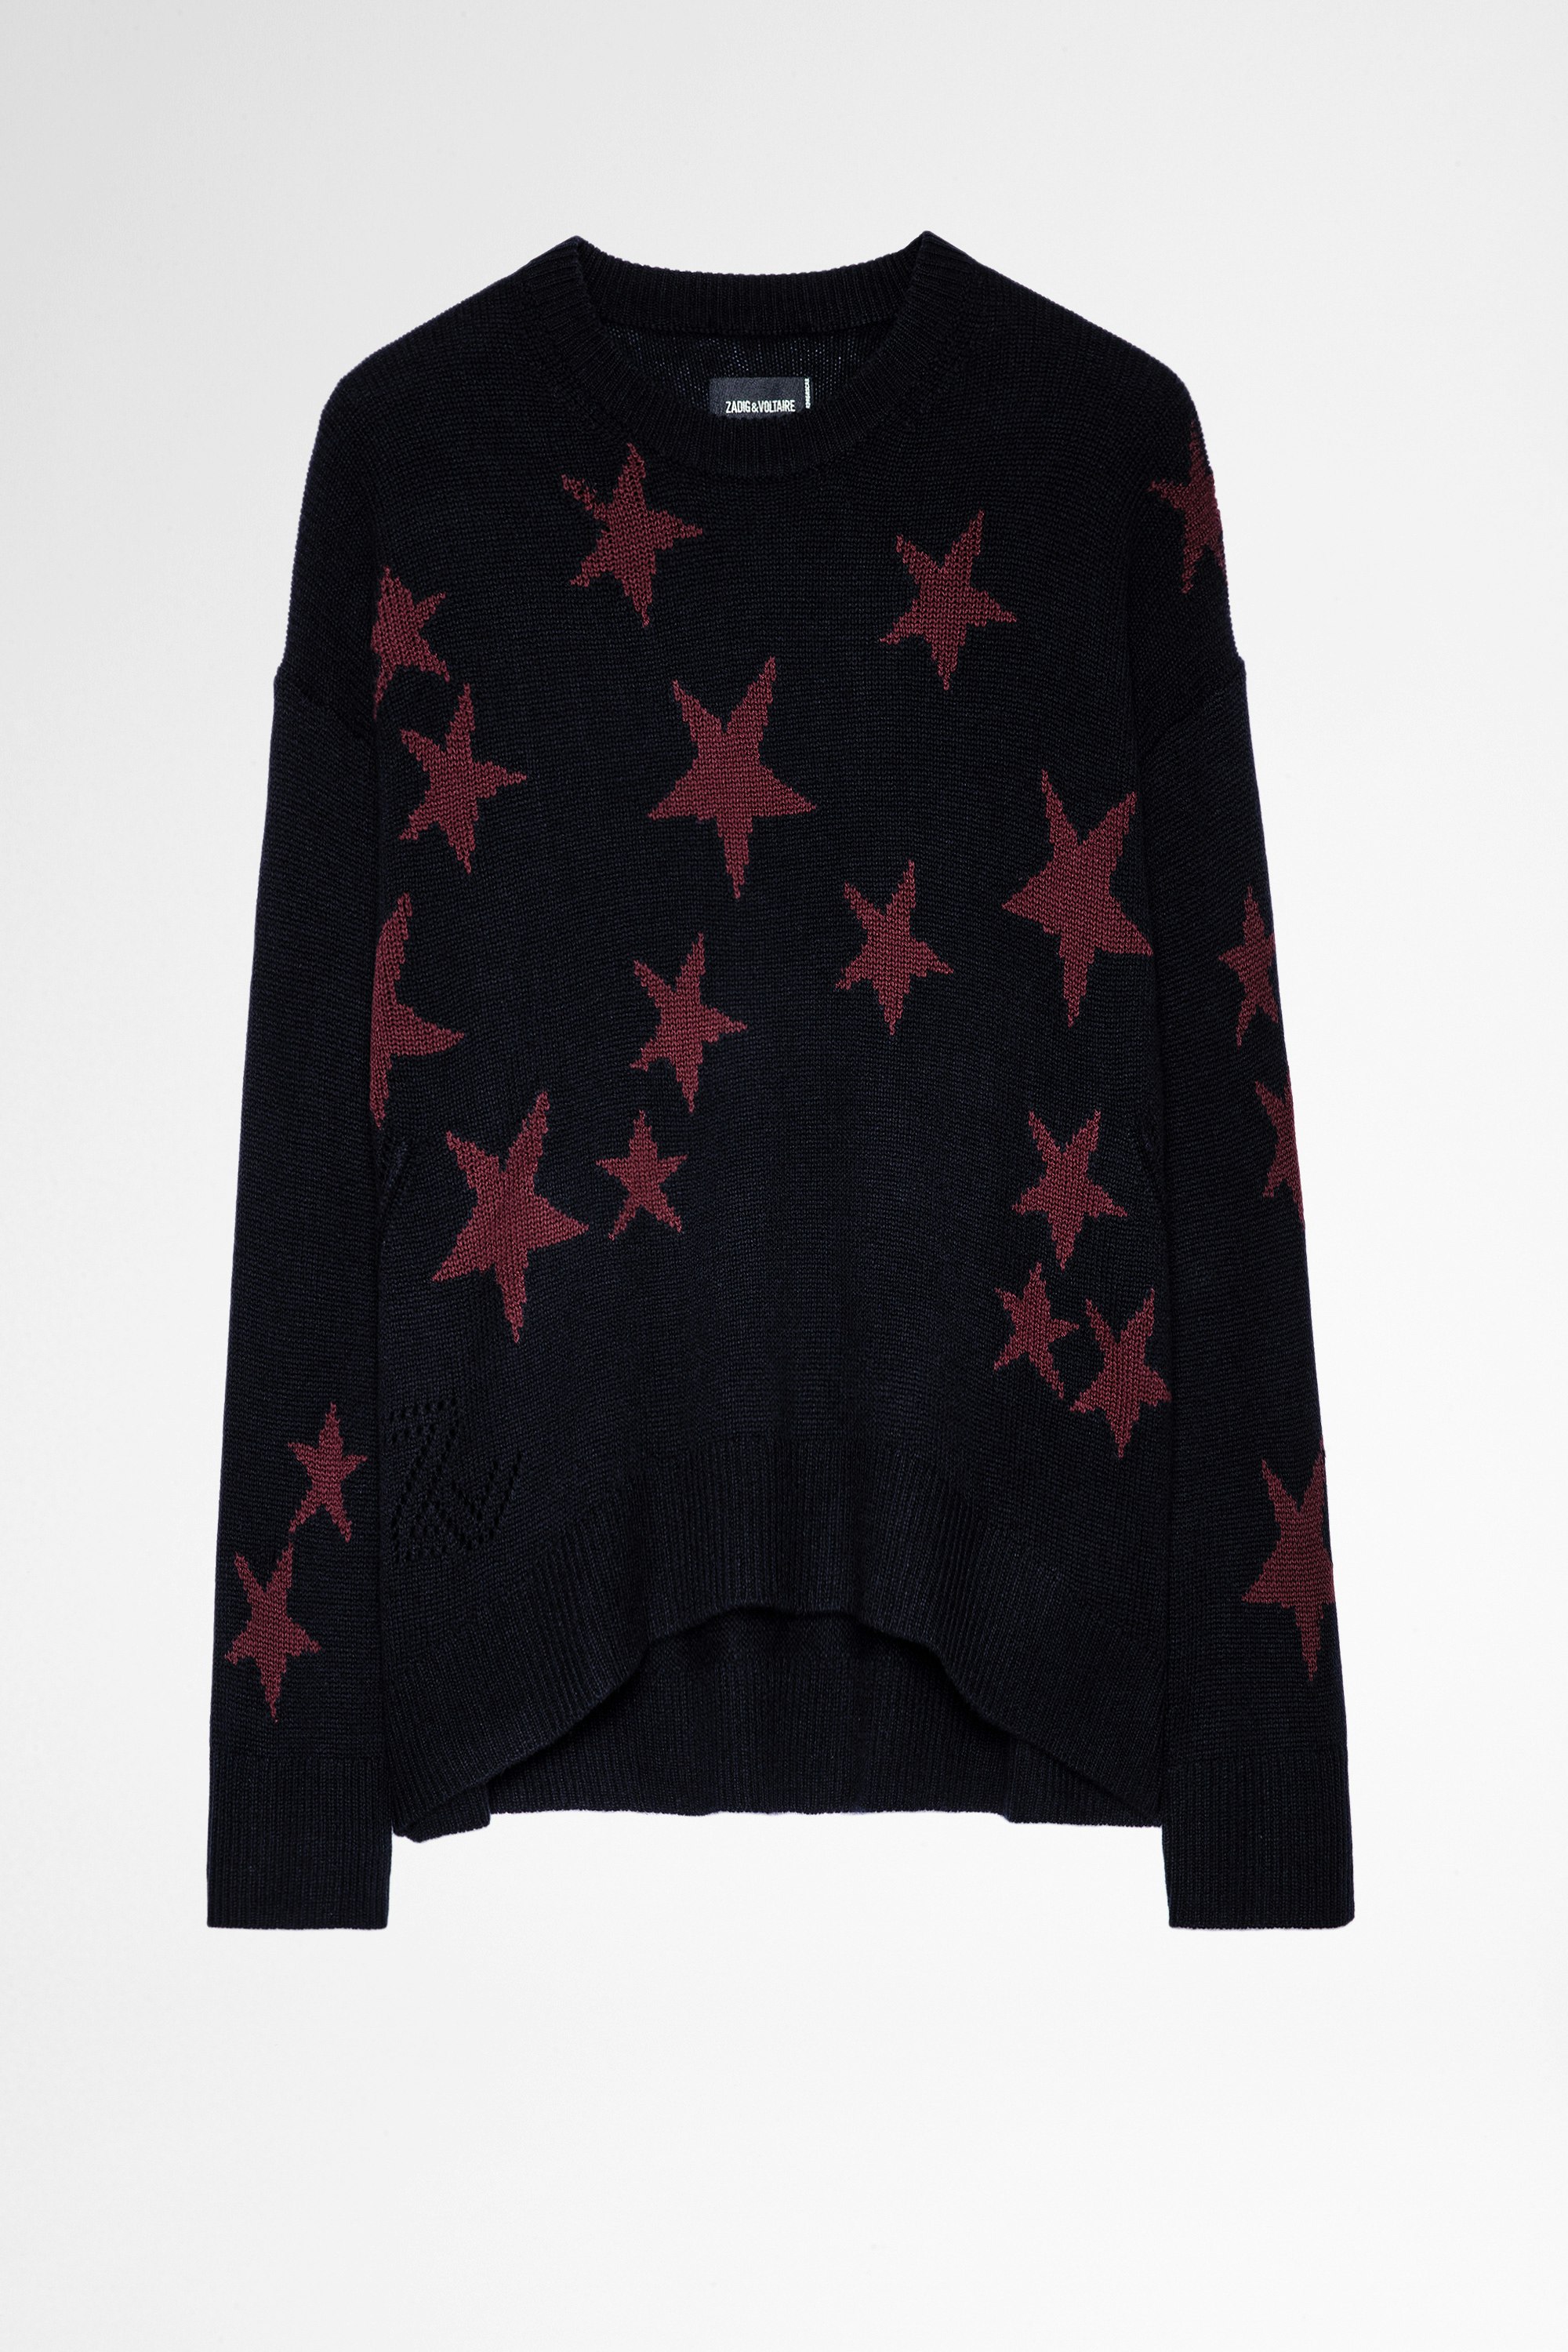 Markus Cashmere Sweater Women's navy blue cashmere sweater with stars print